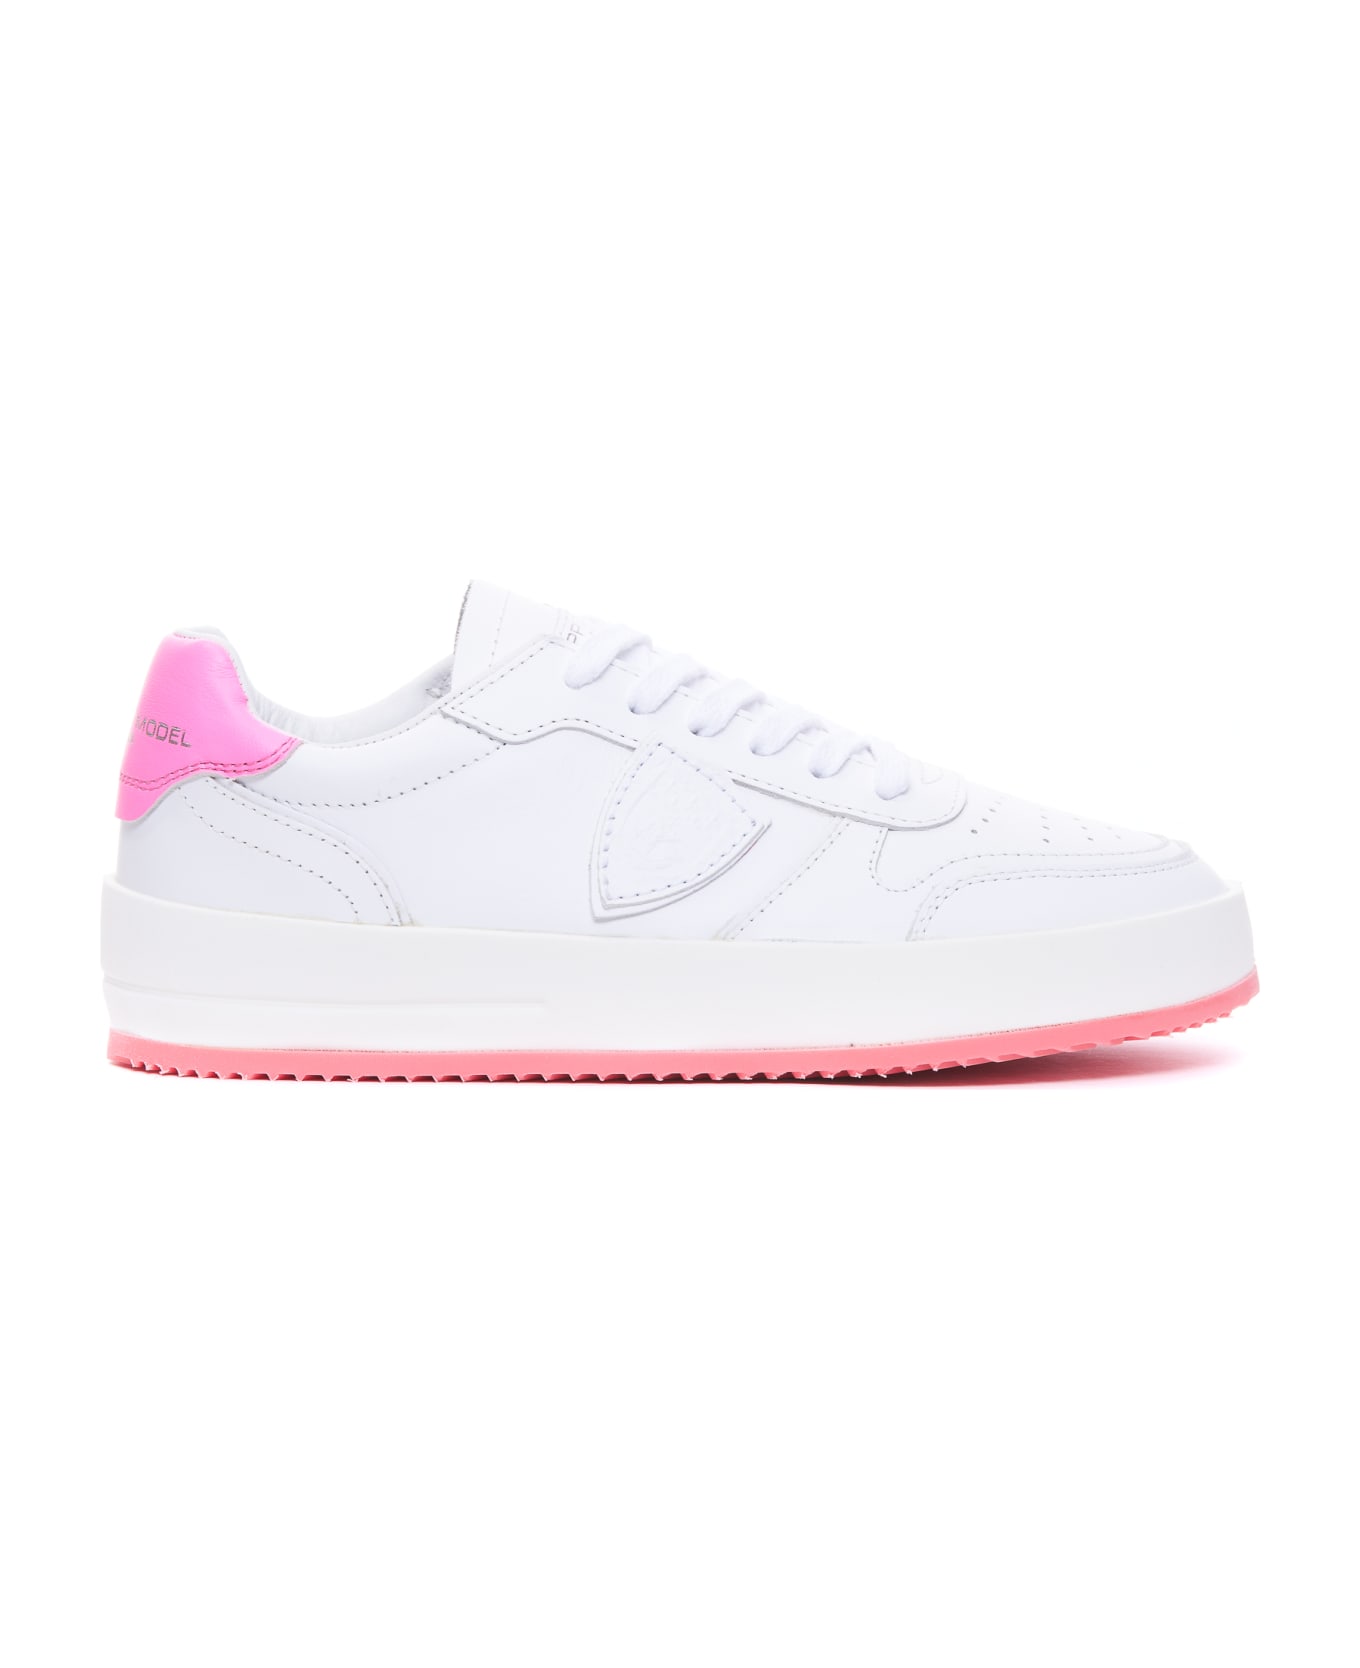 Philippe Model Nice Low Sneakers - Veau blanc/fucsia